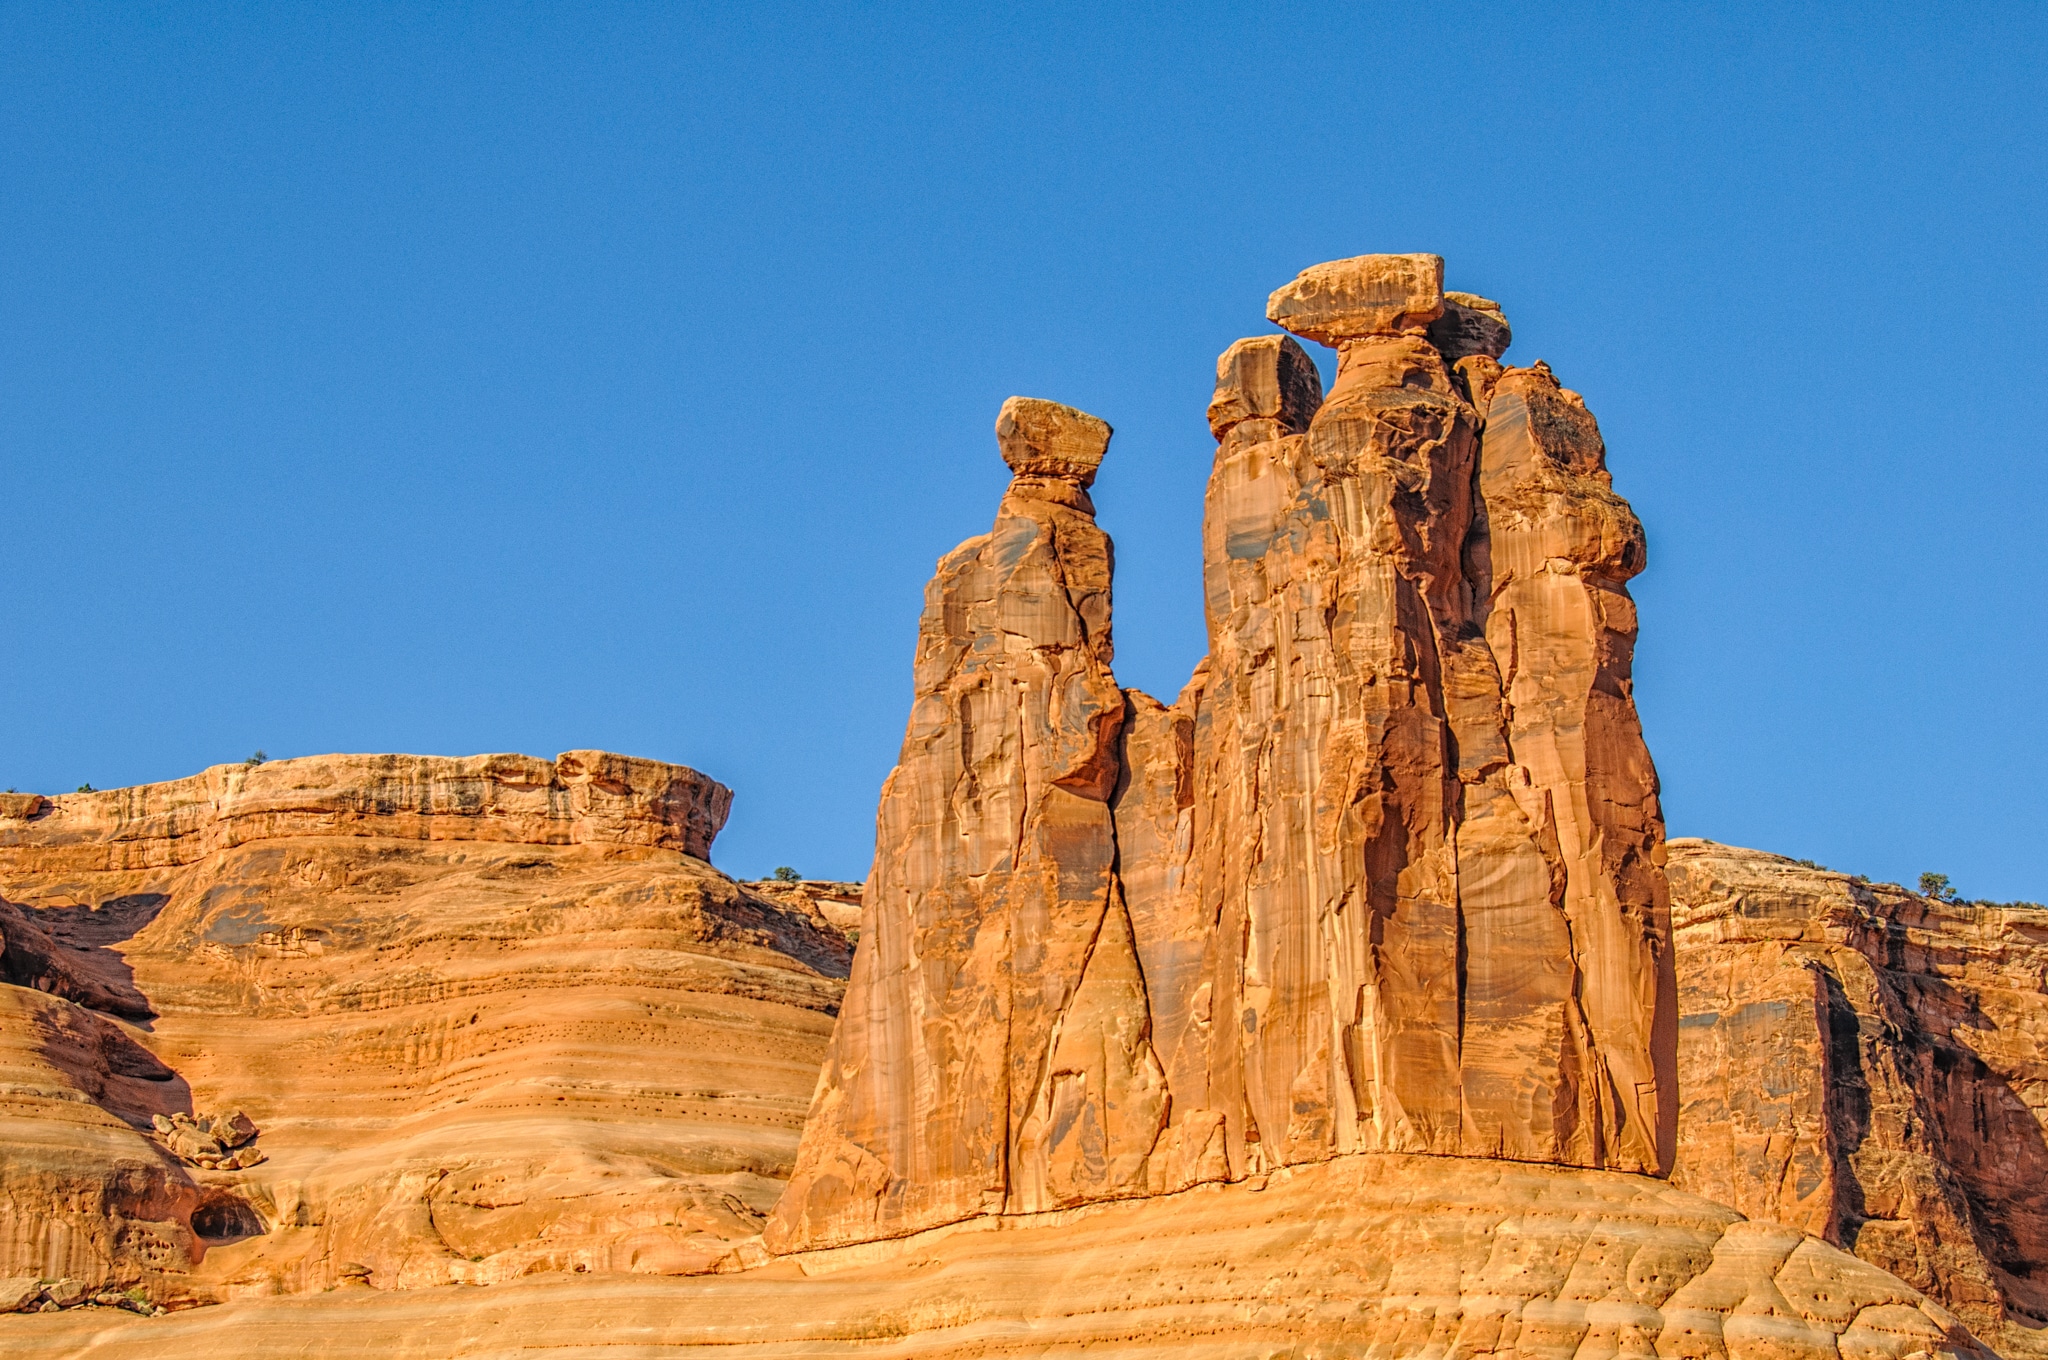 Rock formation known as The Gossips. (Imagine pioneer women wearing 1800s attire.) In Arches National Park.